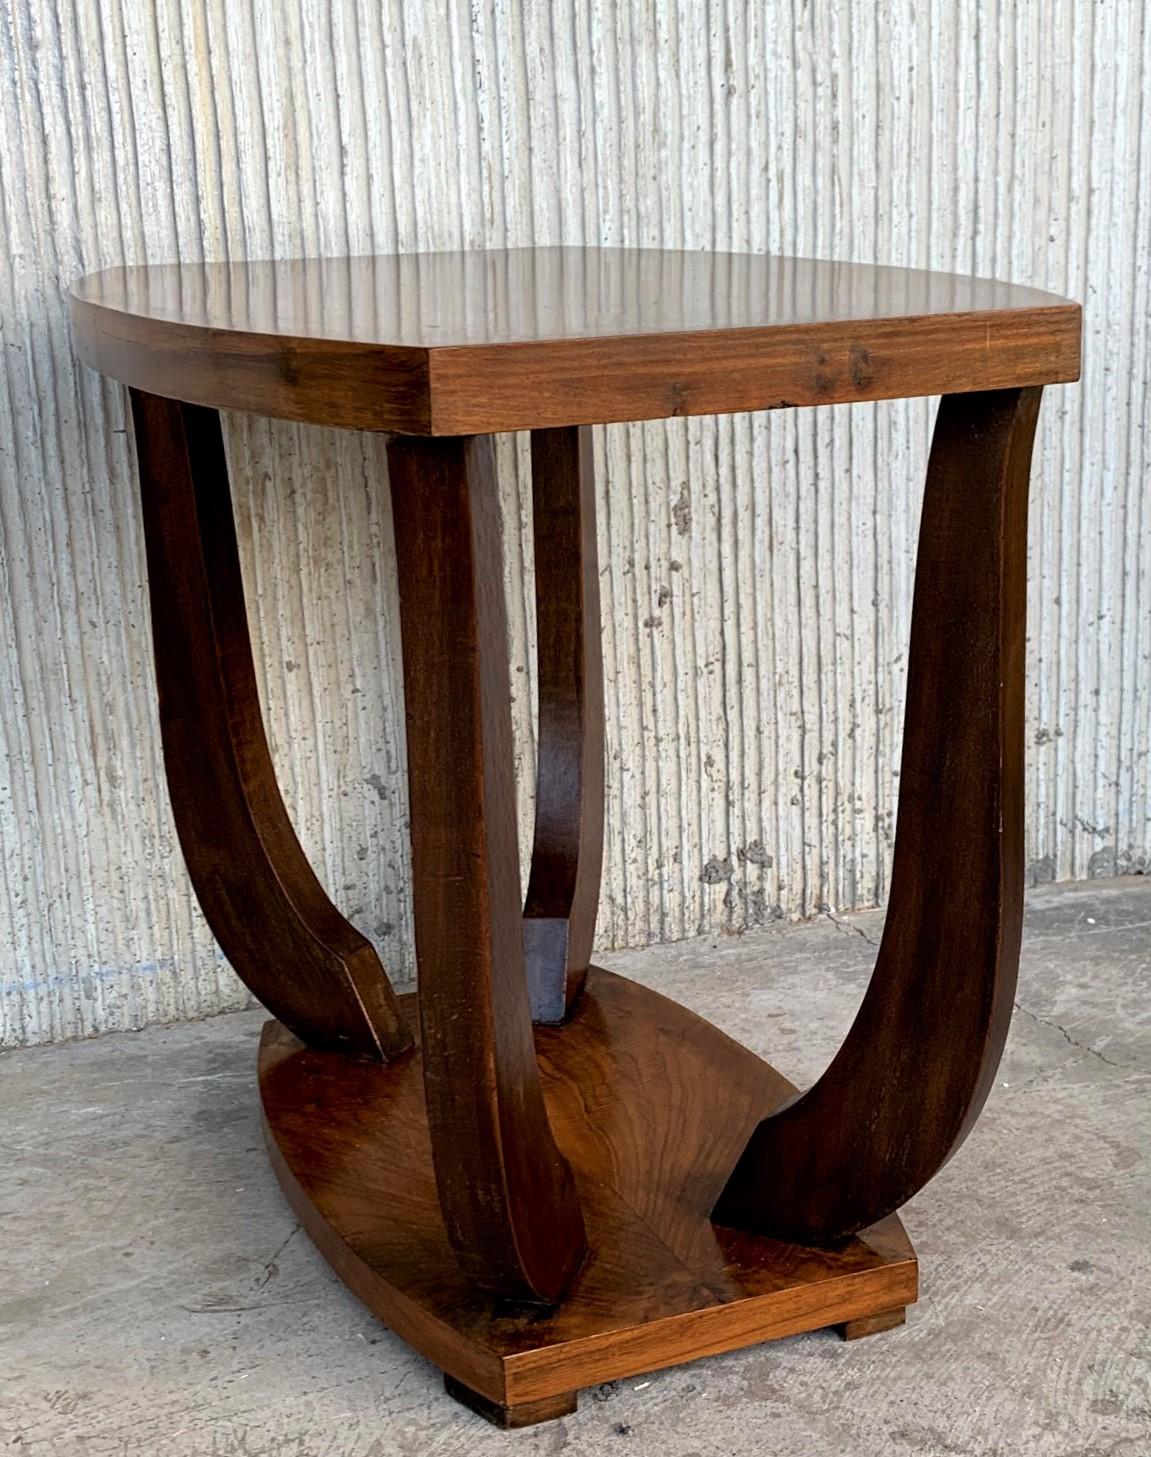 Italian Art Deco rectangular, oval side table, circa 1930s. Narrow ebonized feet and round finial at center base set off the figured walnut. Lower smaller round tier. Unknown maker.